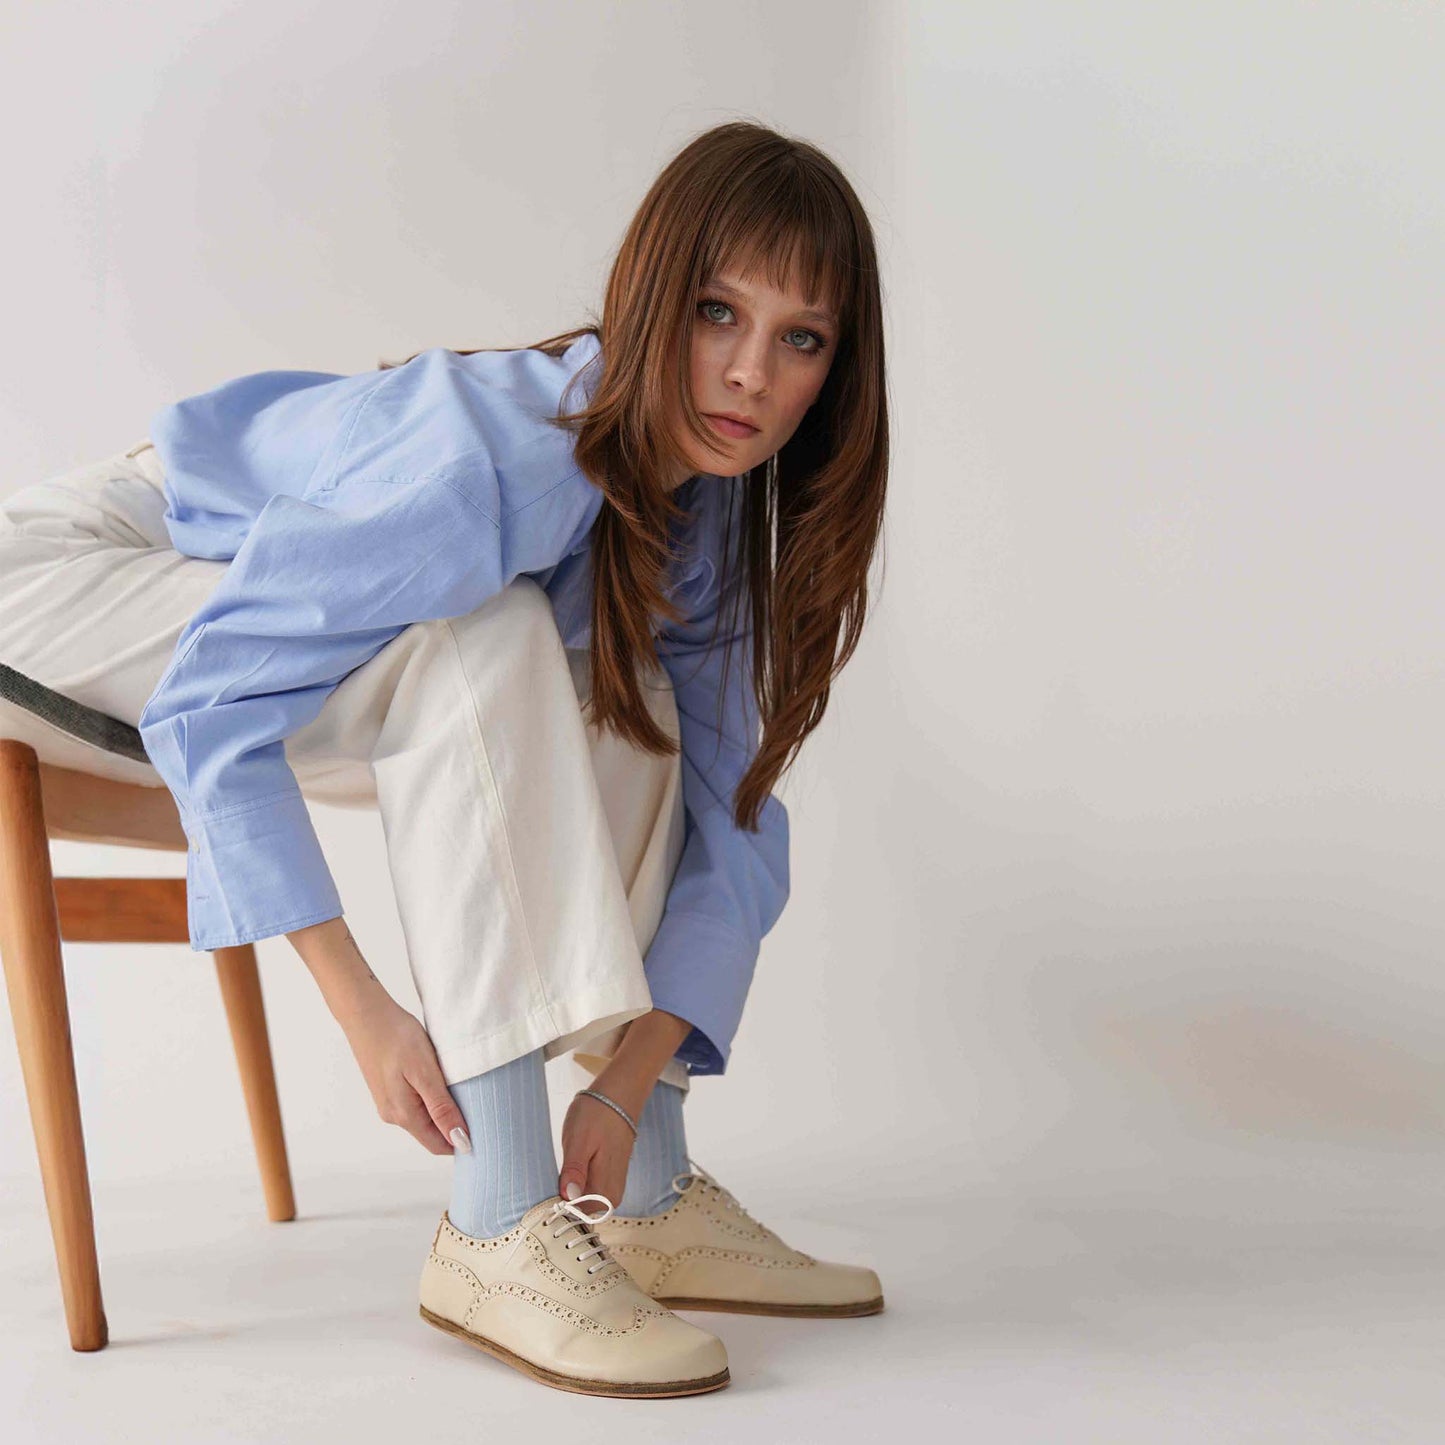 Model adjusting Doris Leather Barefoot Women's Oxfords in beige while sitting on a chair, wearing light blue socks and white pants for a stylish look.